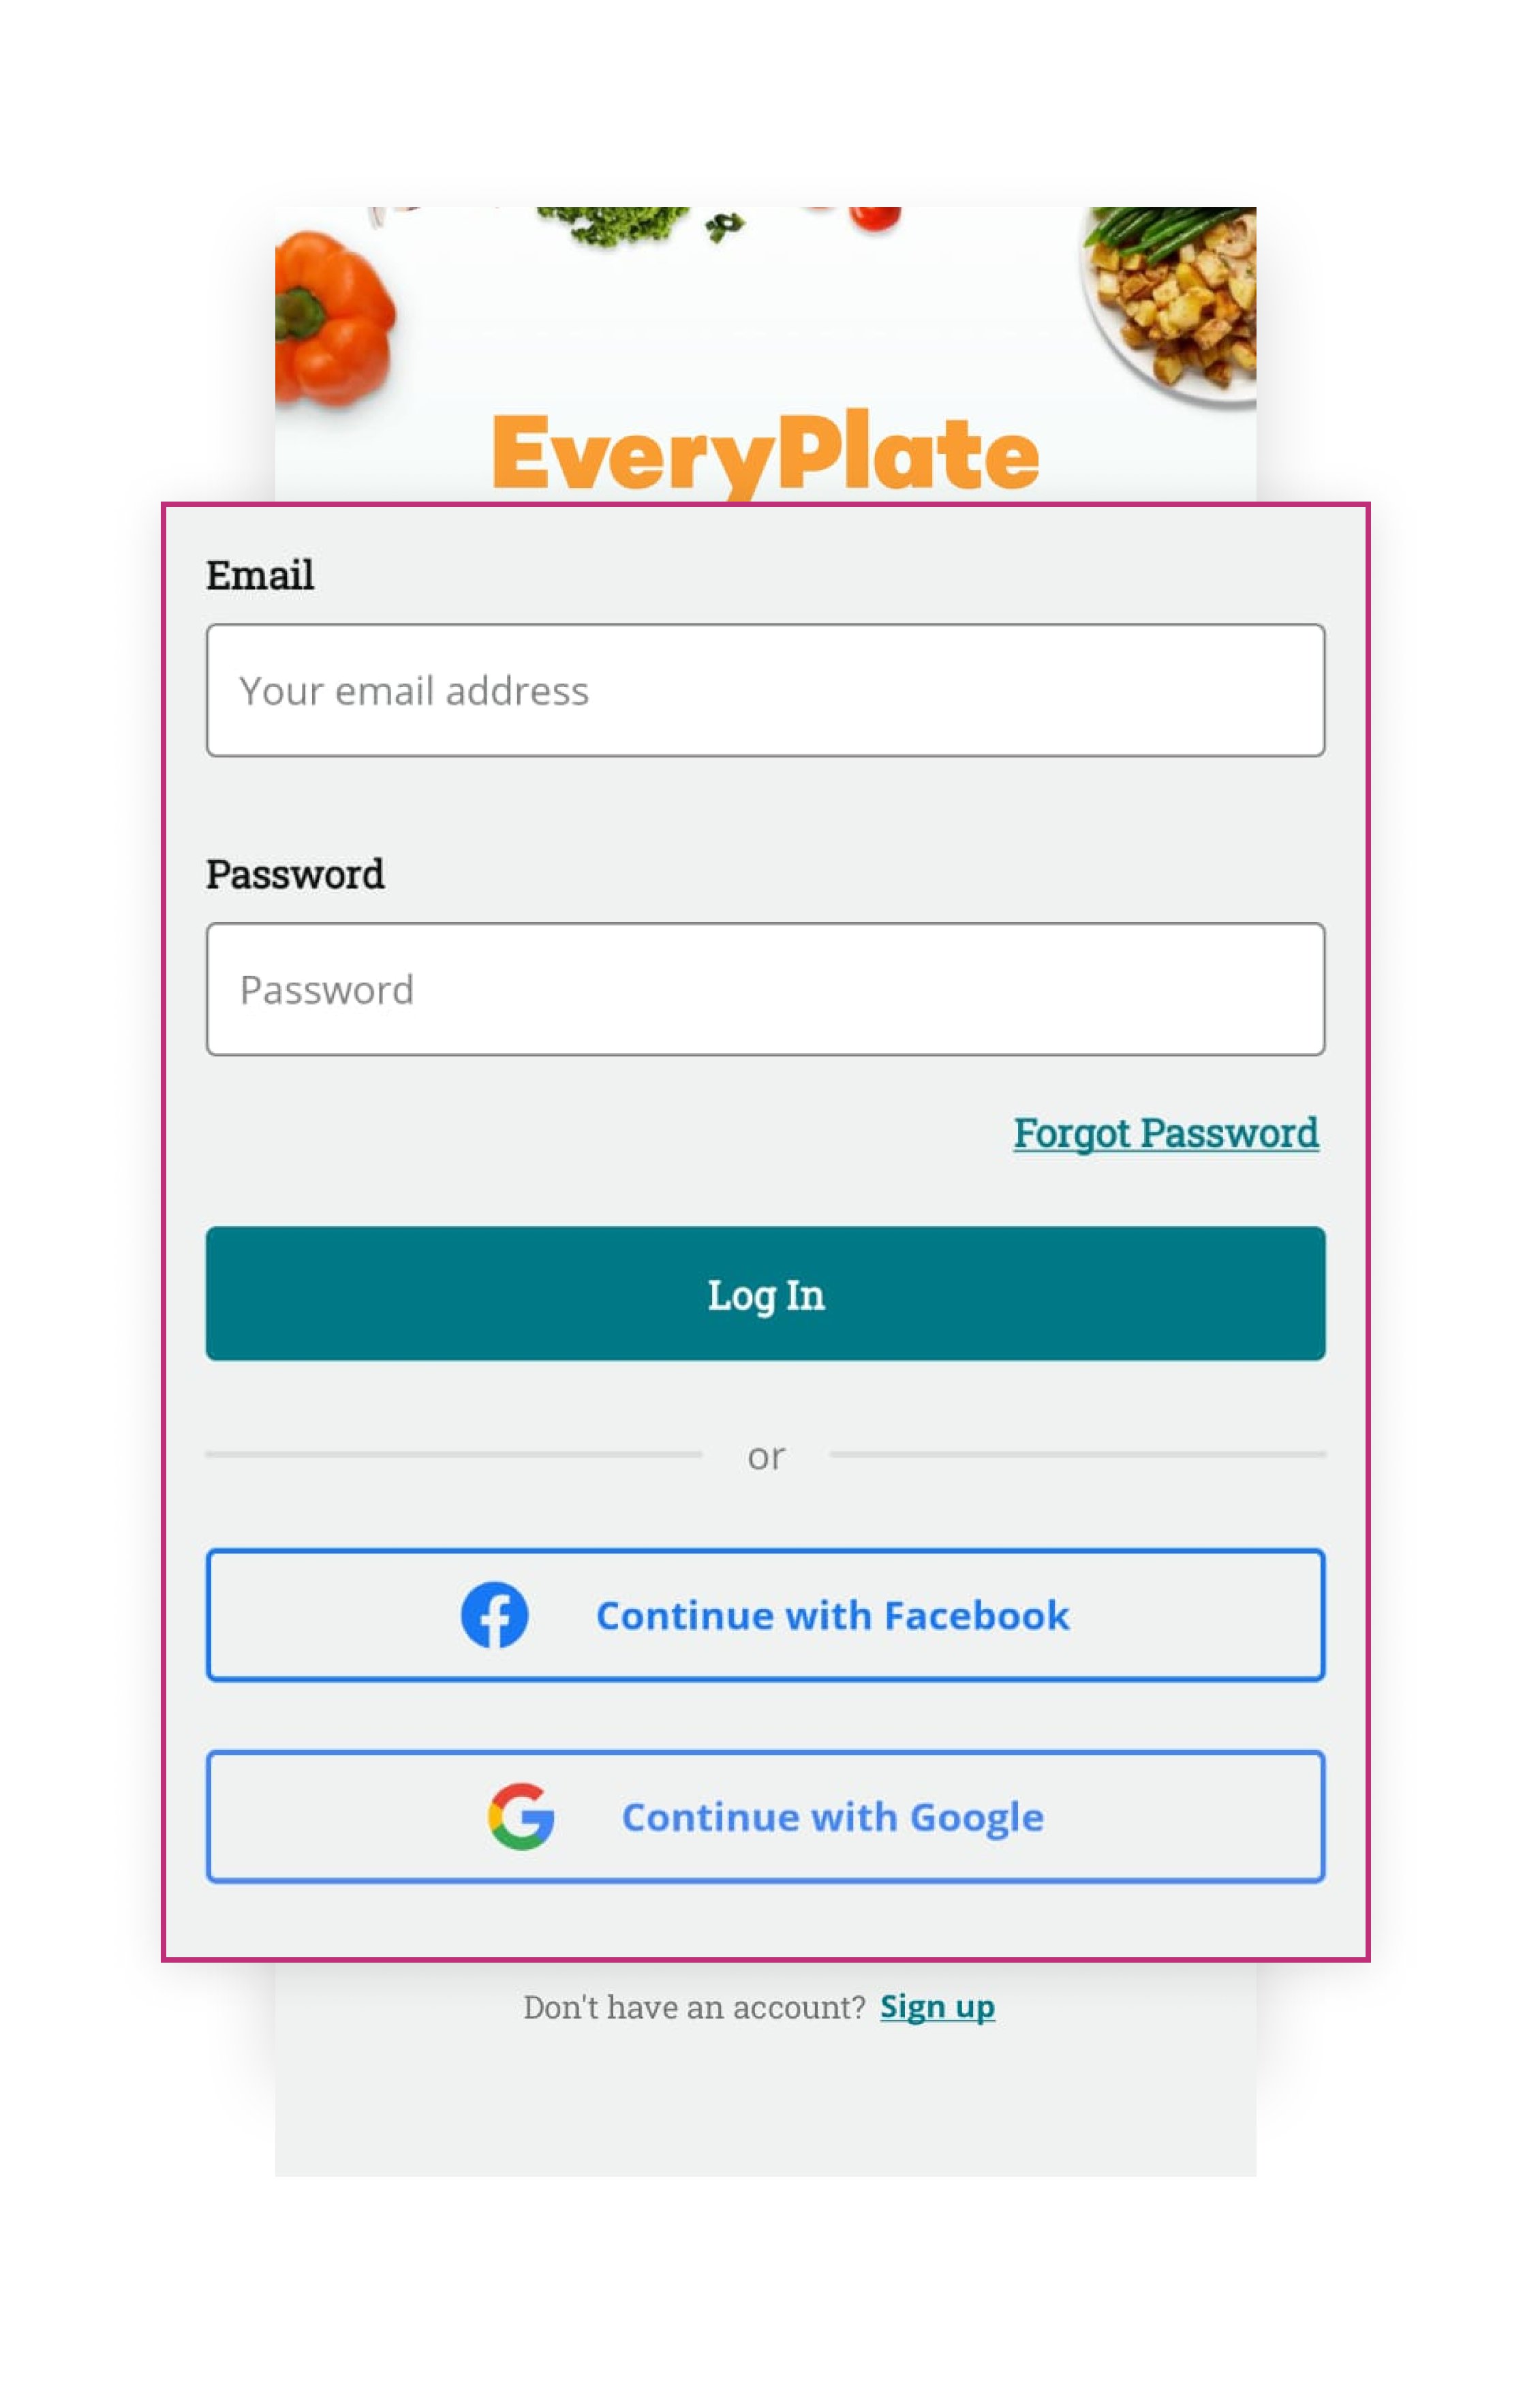 Onboarding Test Example with social login. Source - EveryPlate